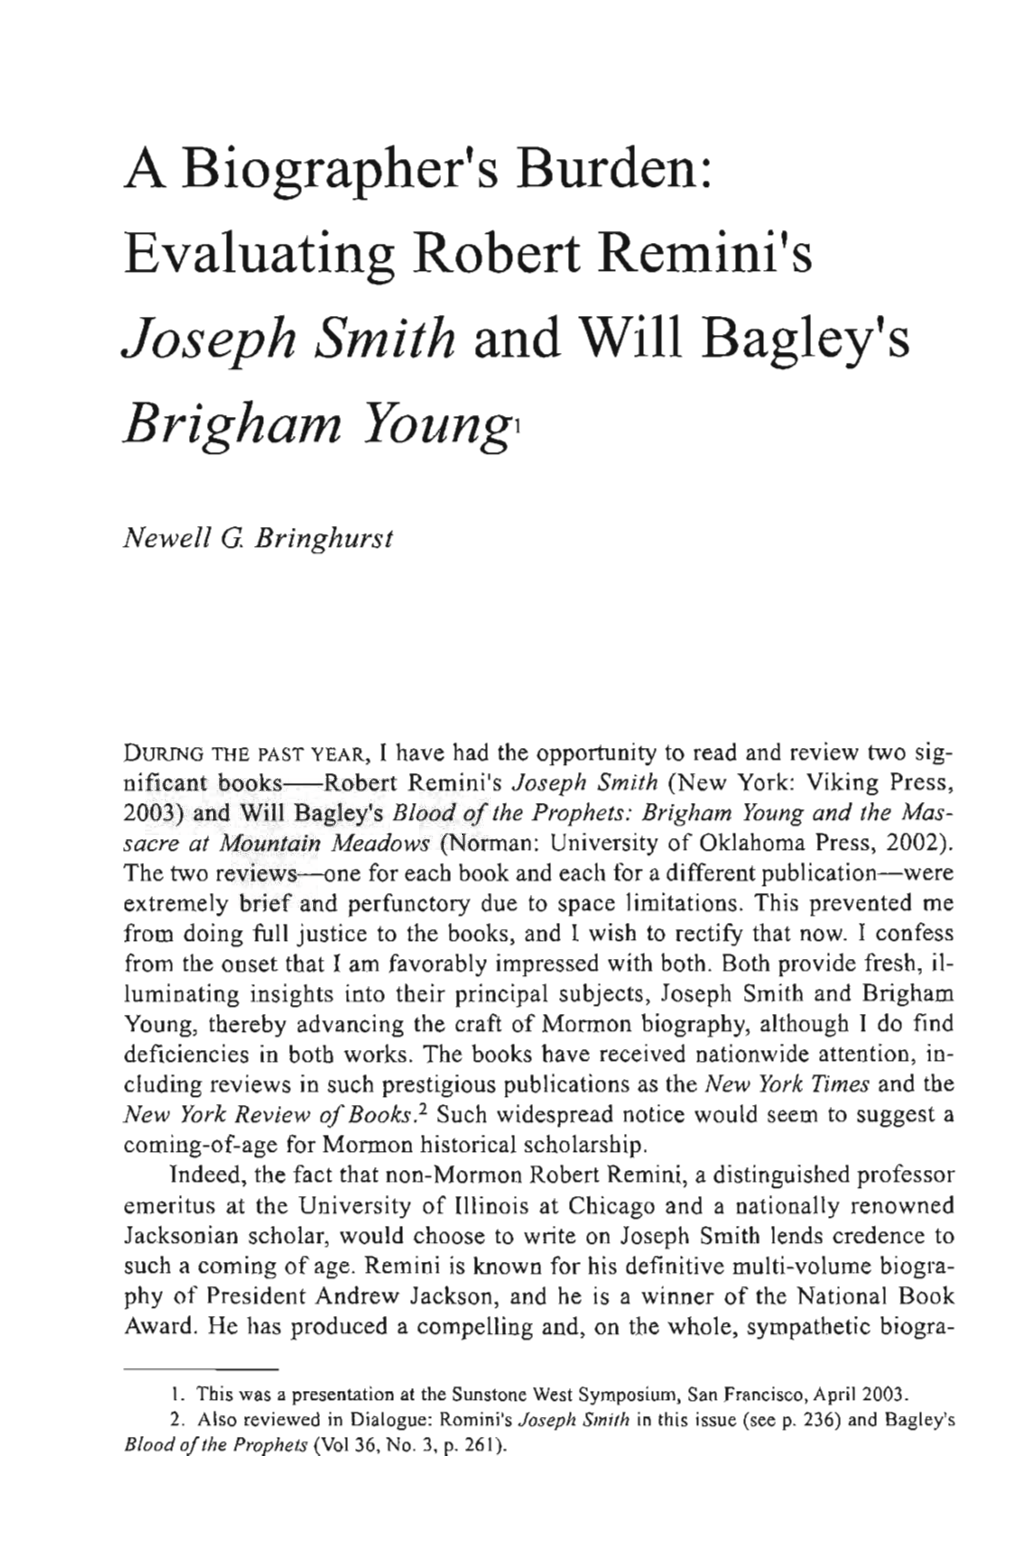 Evaluating Robert Remini's Joseph Smith and Will Bagley's Brigham Youngs